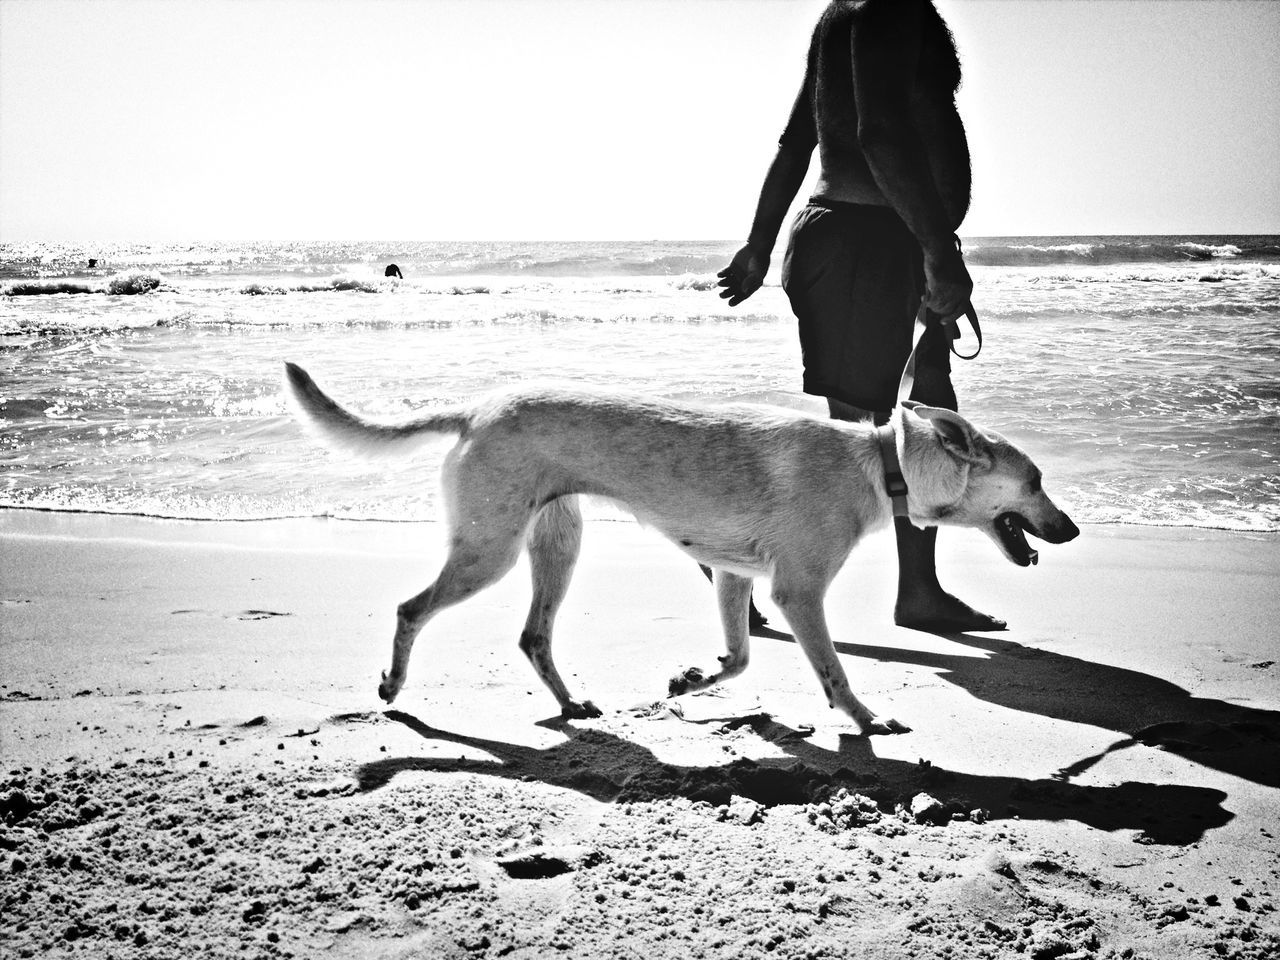 beach, sea, animal themes, domestic animals, horizon over water, one animal, dog, mammal, sand, pets, water, shore, full length, clear sky, walking, standing, one person, rear view, nature, sky